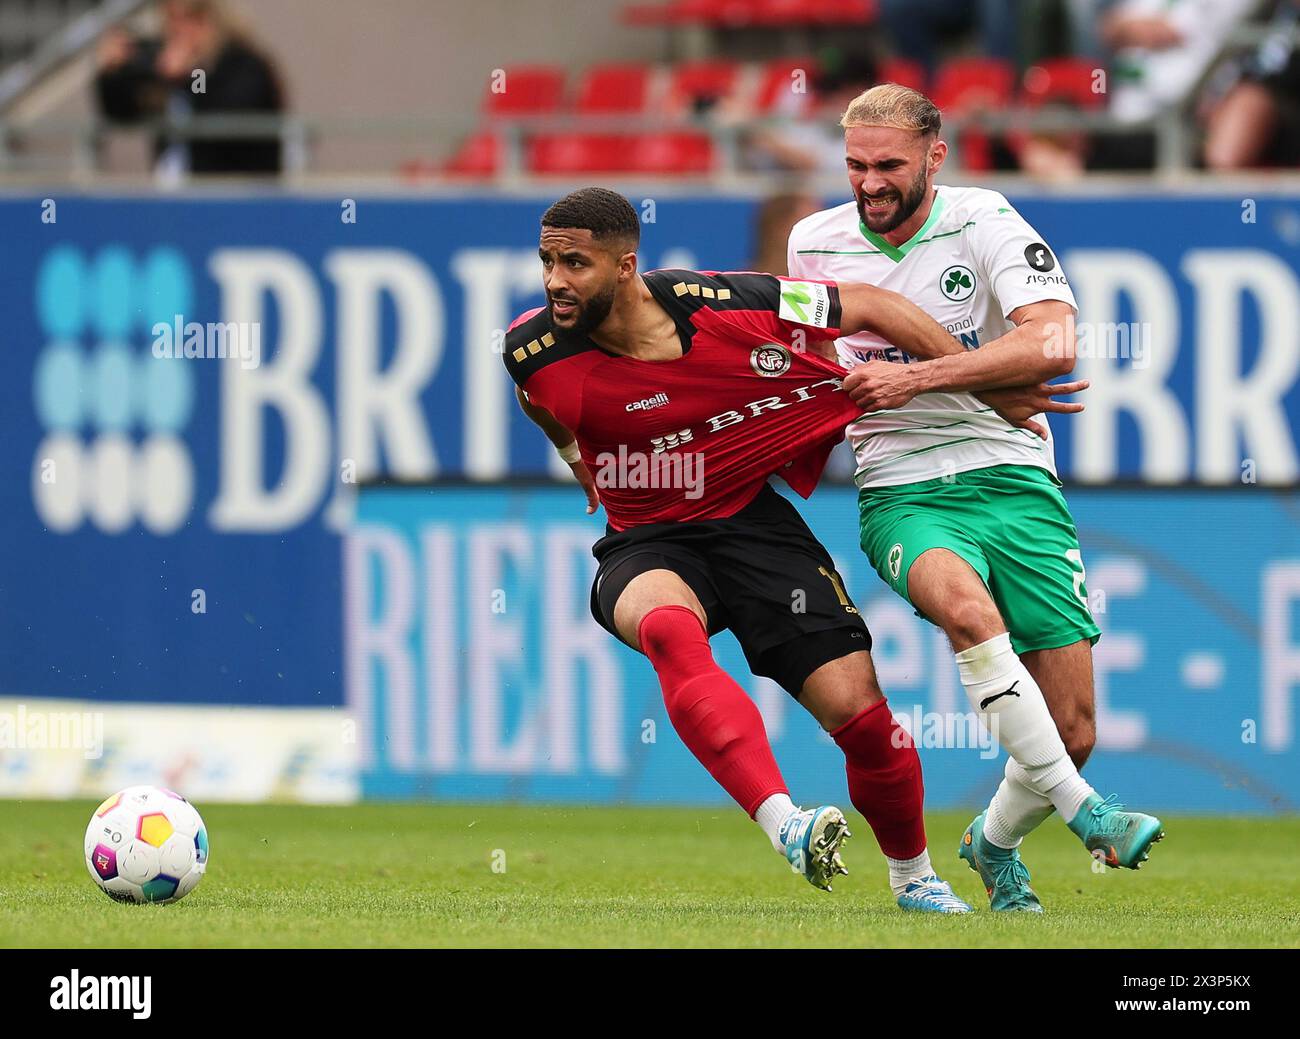 Wiesbaden, Germany. 28th Apr, 2024. Soccer: Bundesliga 2, SV Wehen Wiesbaden - SpVgg Greuther Fürth, Matchday 31, BRITA-Arena. Wiesbaden's Keanan Bennetts (l) and Fürth's Simon Asta fight for the ball. Credit: Jörg Halisch/dpa - IMPORTANT NOTE: In accordance with the regulations of the DFL German Football League and the DFB German Football Association, it is prohibited to utilize or have utilized photographs taken in the stadium and/or of the match in the form of sequential images and/or video-like photo series./dpa/Alamy Live News Stock Photo